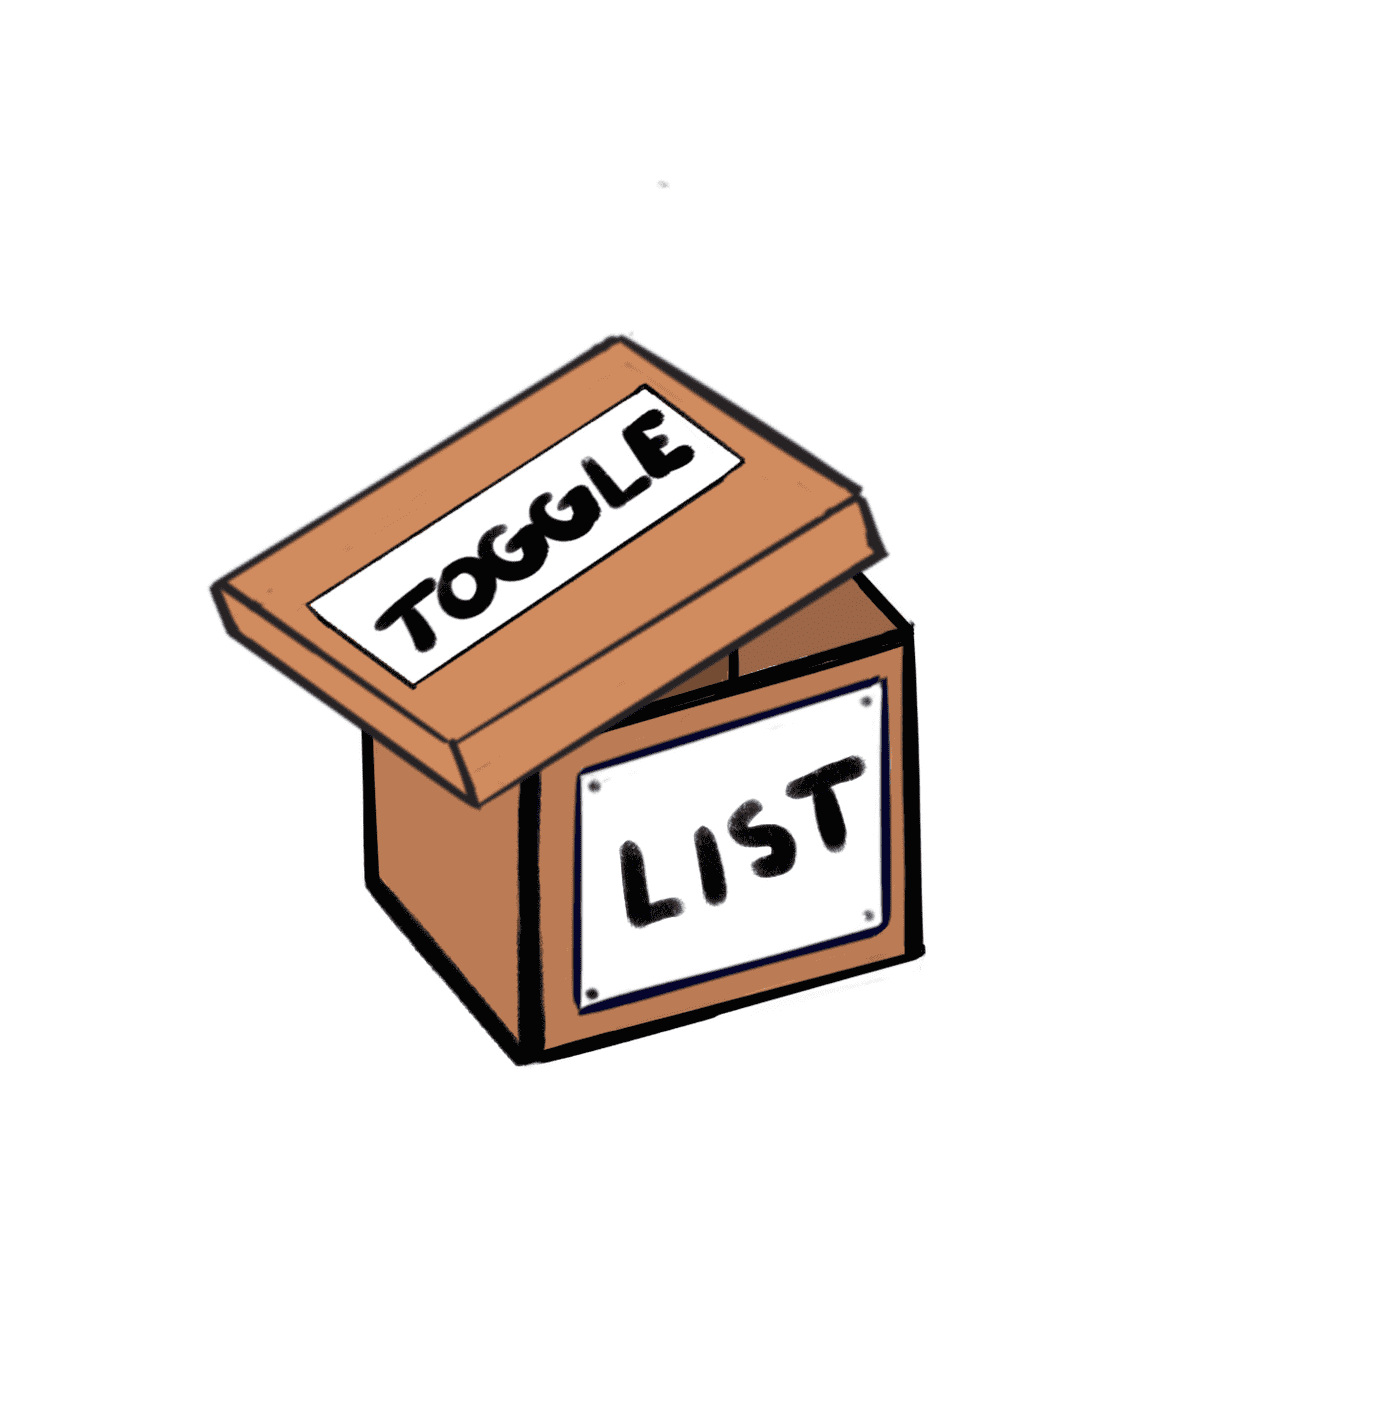 cardboard box labeled "list" and lid labeled "toggle"